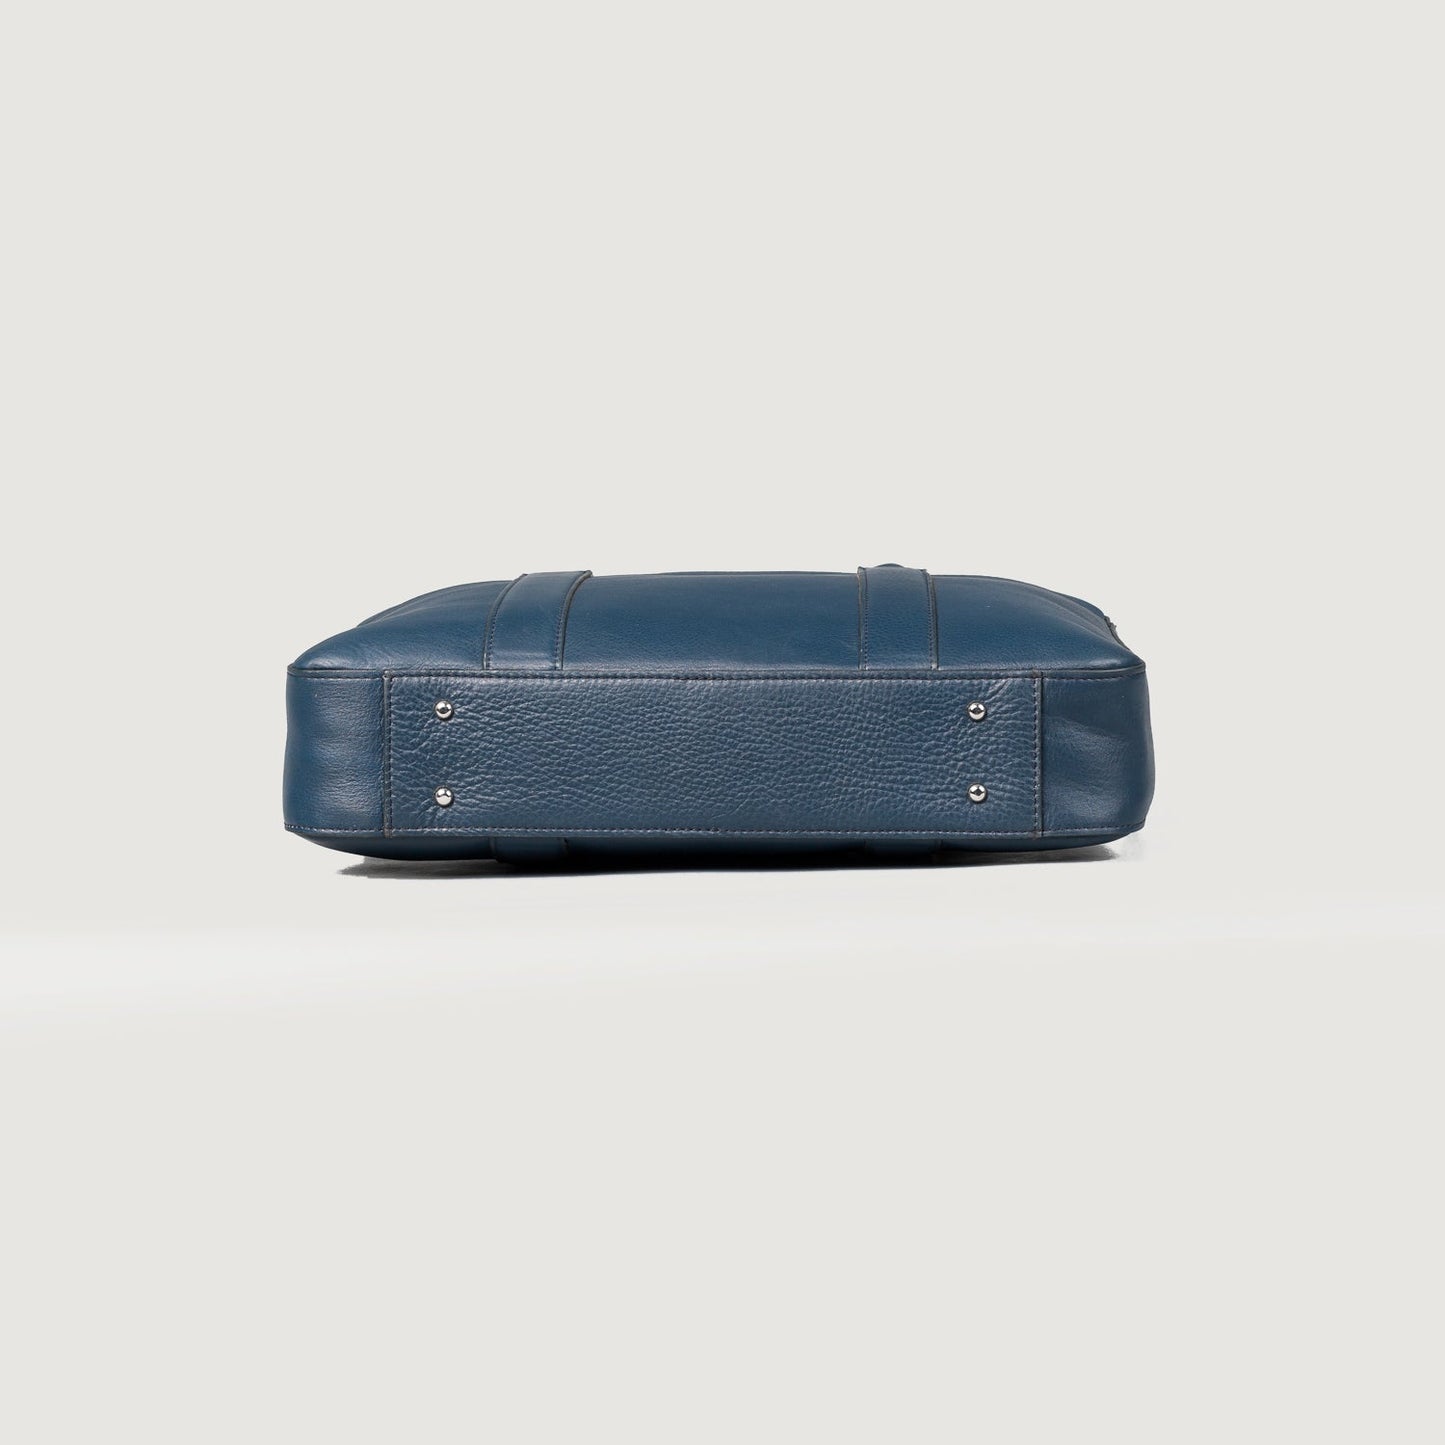 The Captain Midnight Blue Leather Briefcase